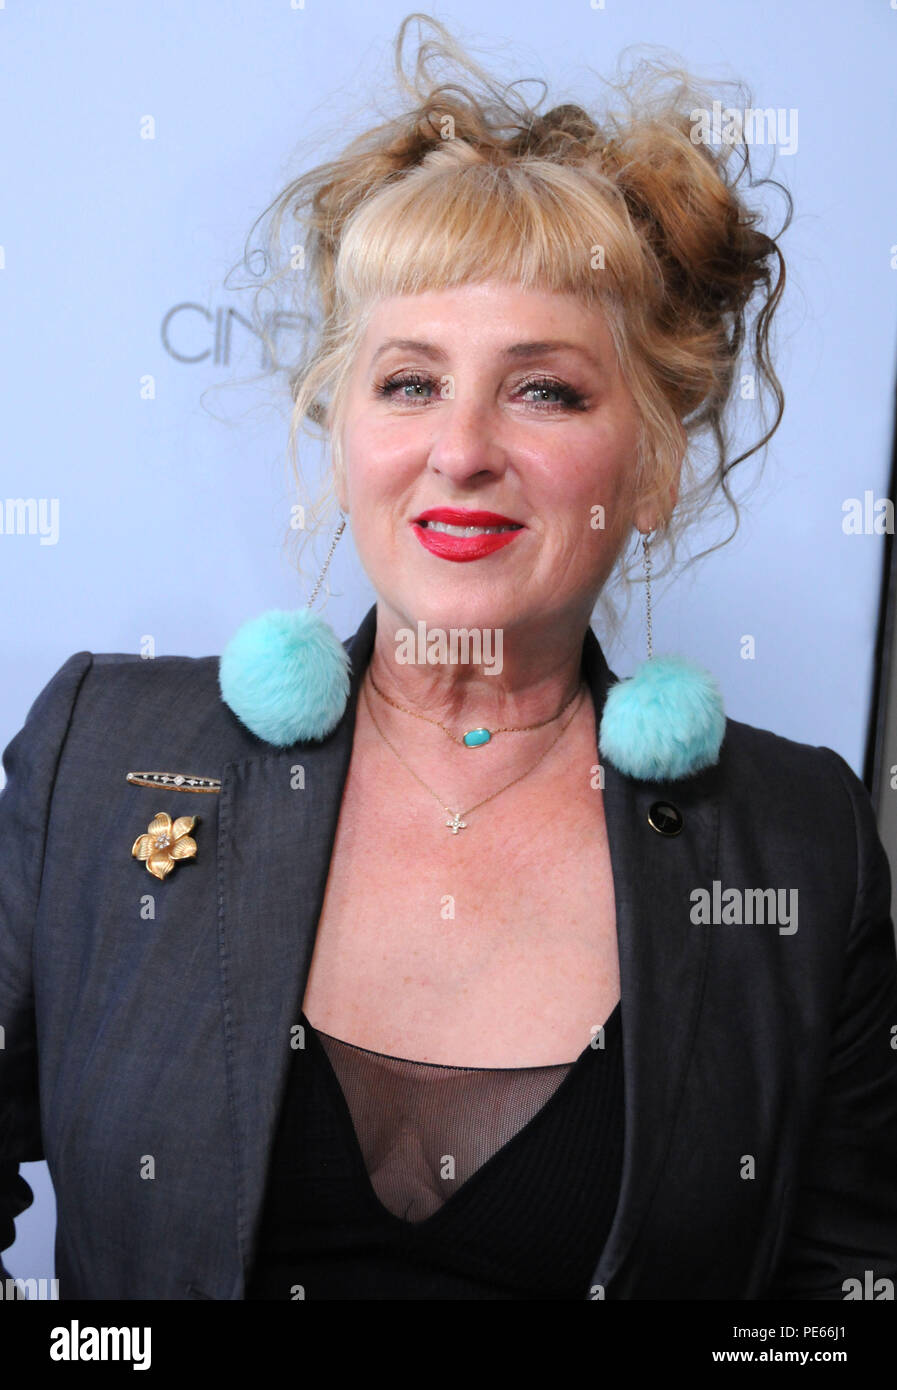 Los Angeles, USA. 12th Aug 2018. Actress Kimmy Robertson attends 'Beverly Center and MUAHS to host Emmy-Nominated Make-Up Artists and Hair Stylists Reception on August 12, 2018 at Cal Mare at the Beverly Center in Los Angeles, California. Photo by Barry King/Alamy Live News Stock Photo